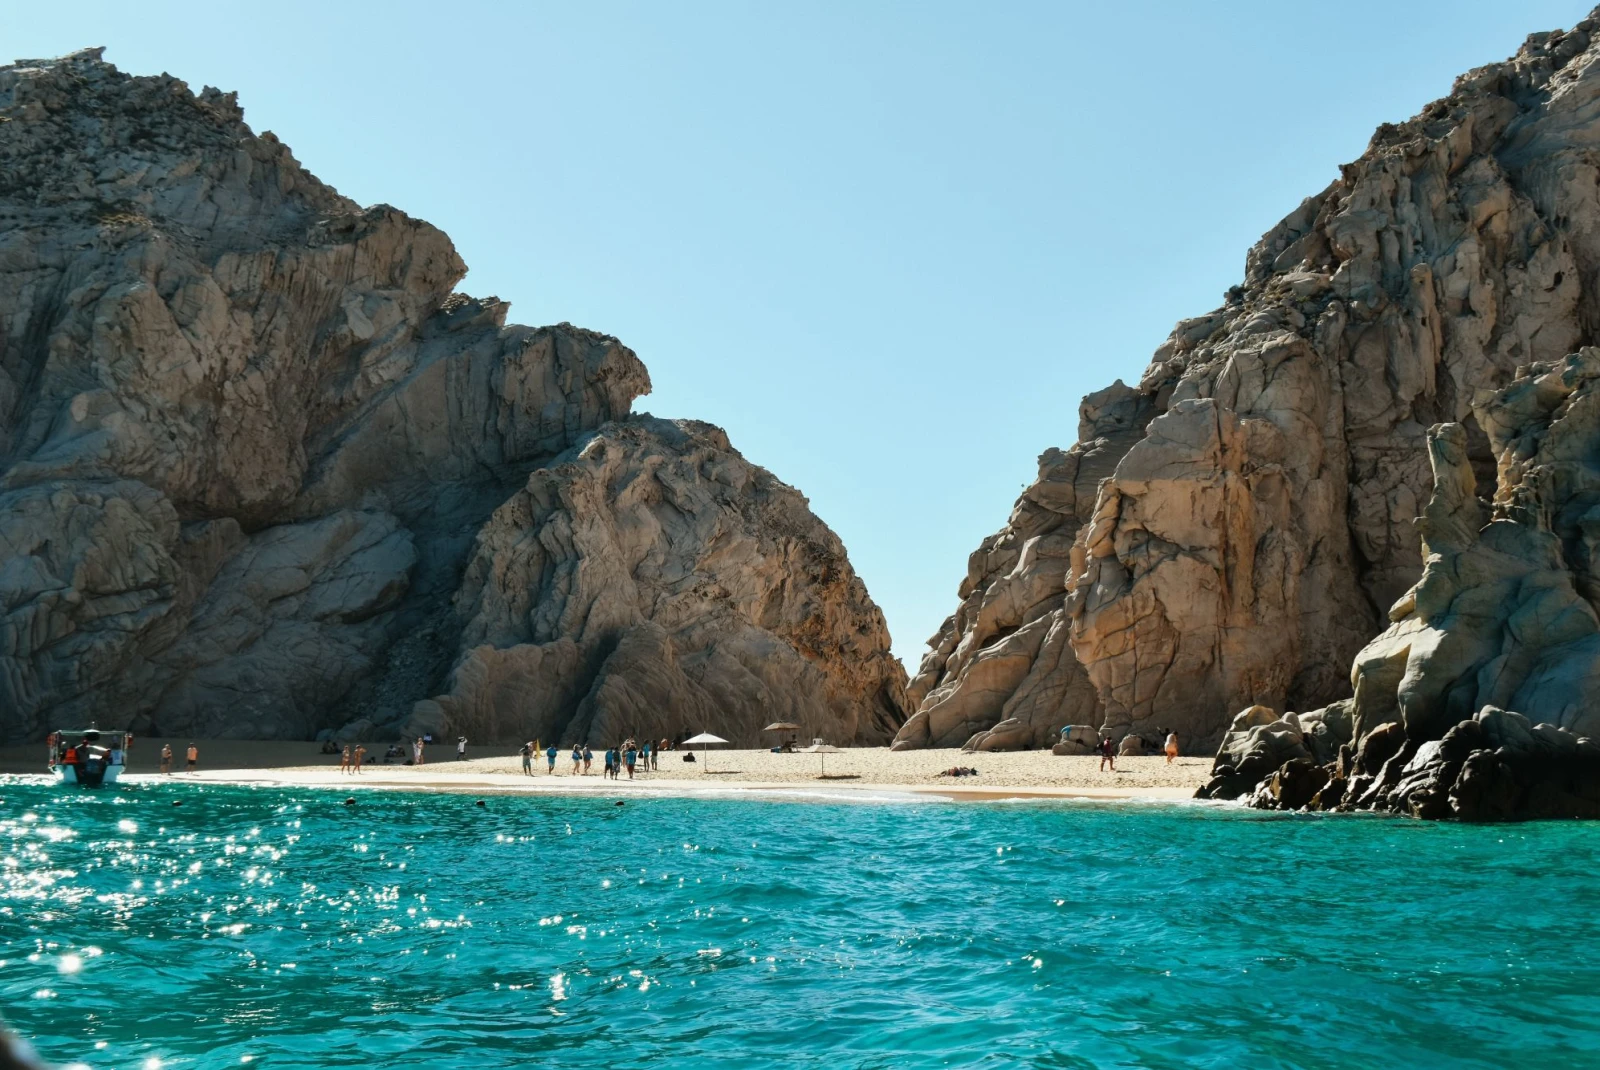 beach with sparkling turquoise waters and stone formations on the sand